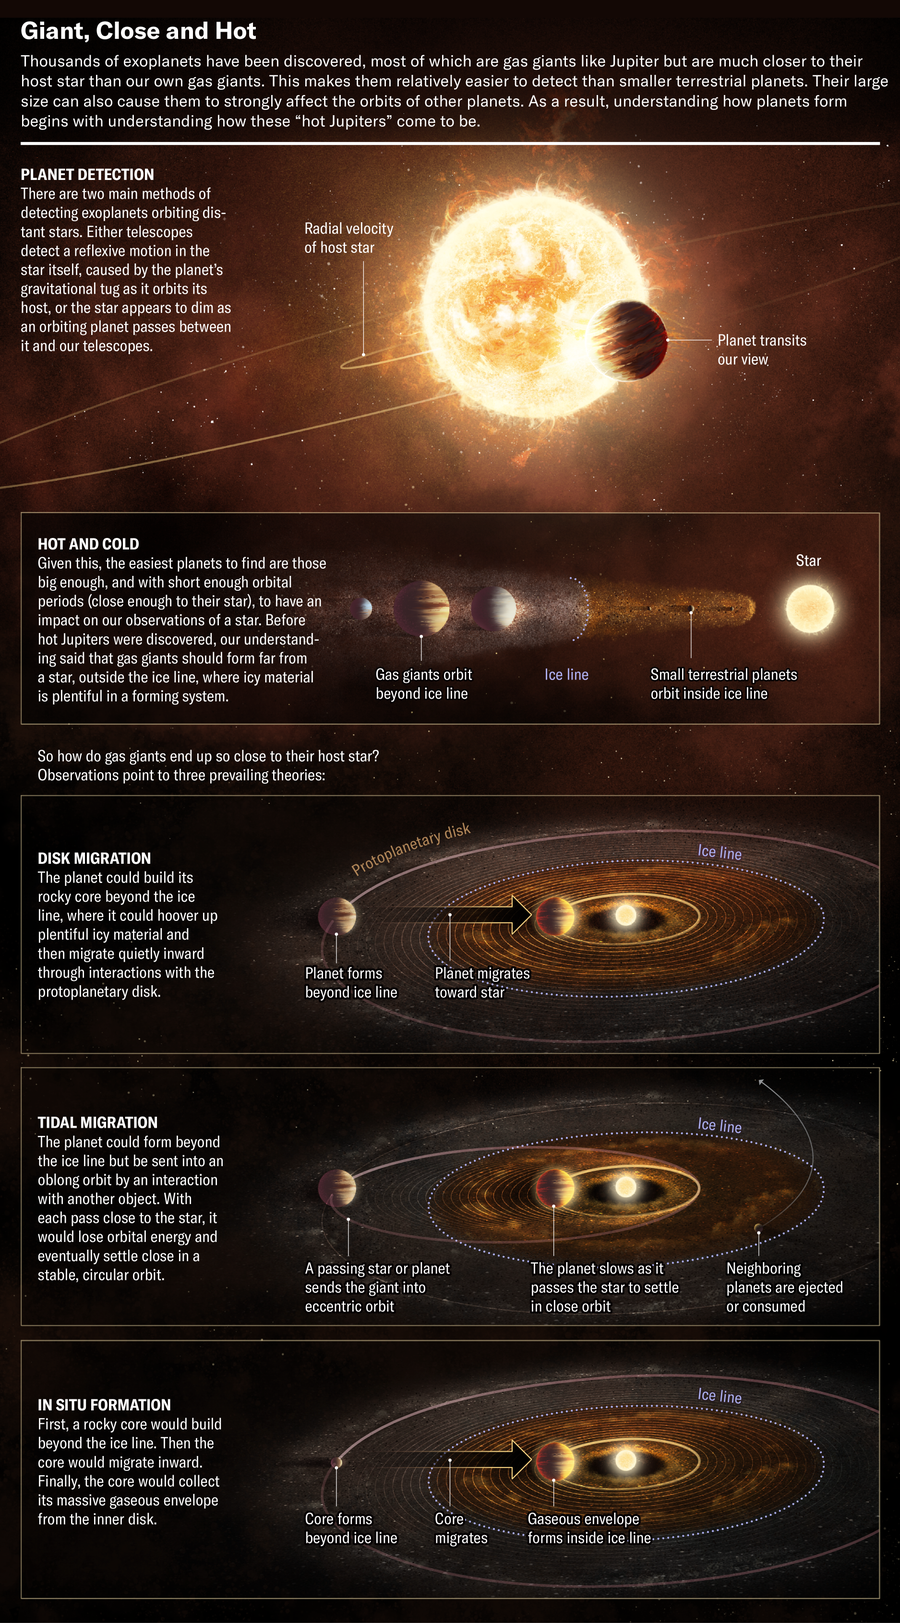 Graphic elucidates the three prevailing theories as to why gas giants end up so close to their host star: disk migration, tidal migration and in situ formation.